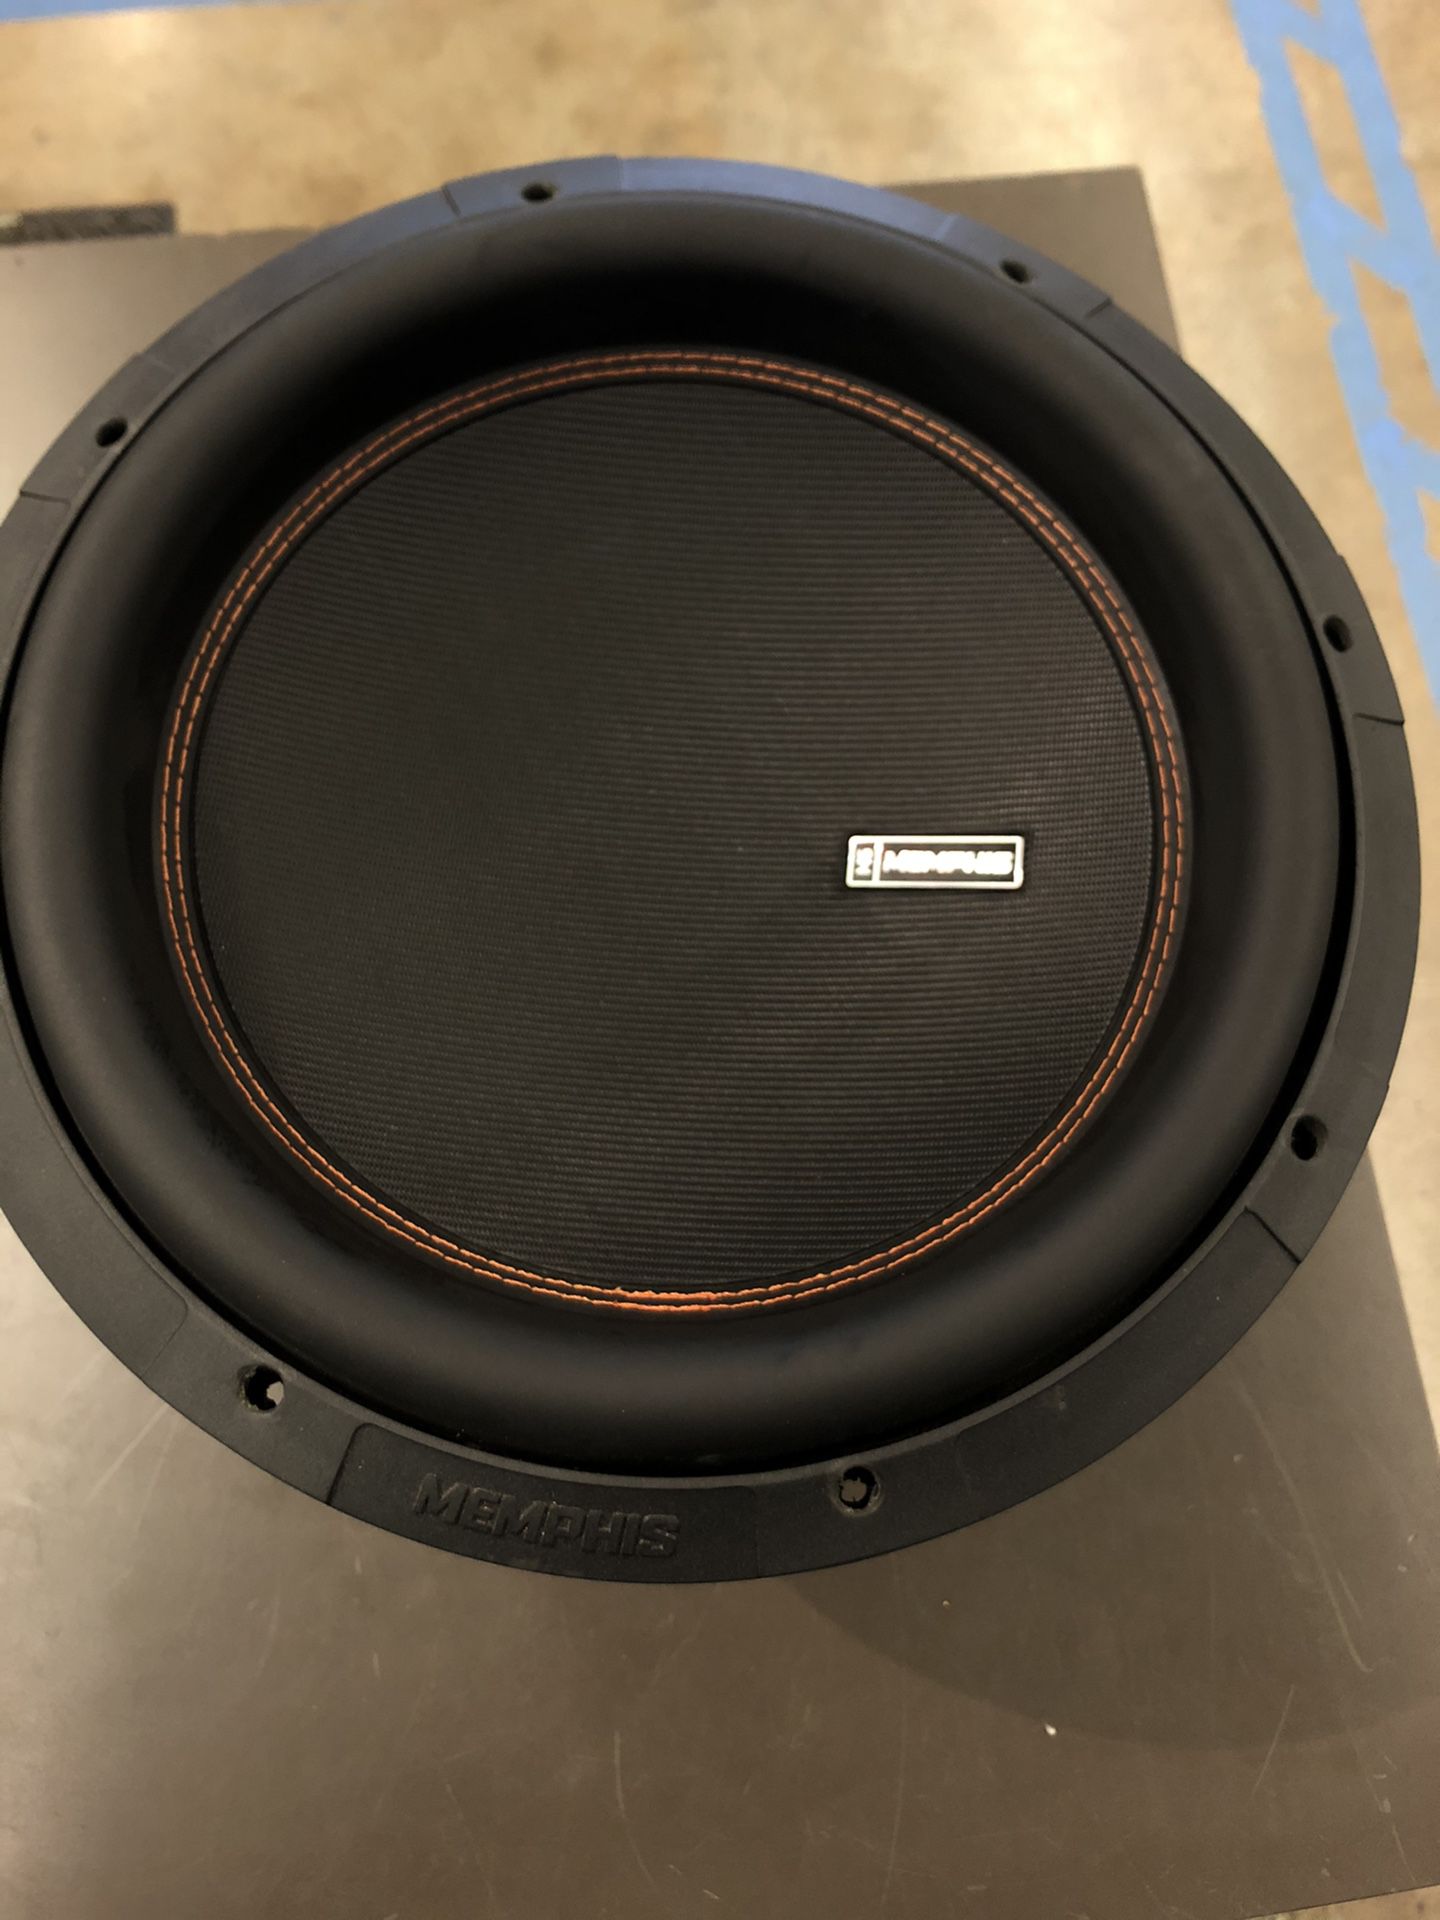 Memphis Audio M612D4 12” sub 700 watts RMS 1400W peak 4-ohm coil no trades pick up in Tacoma